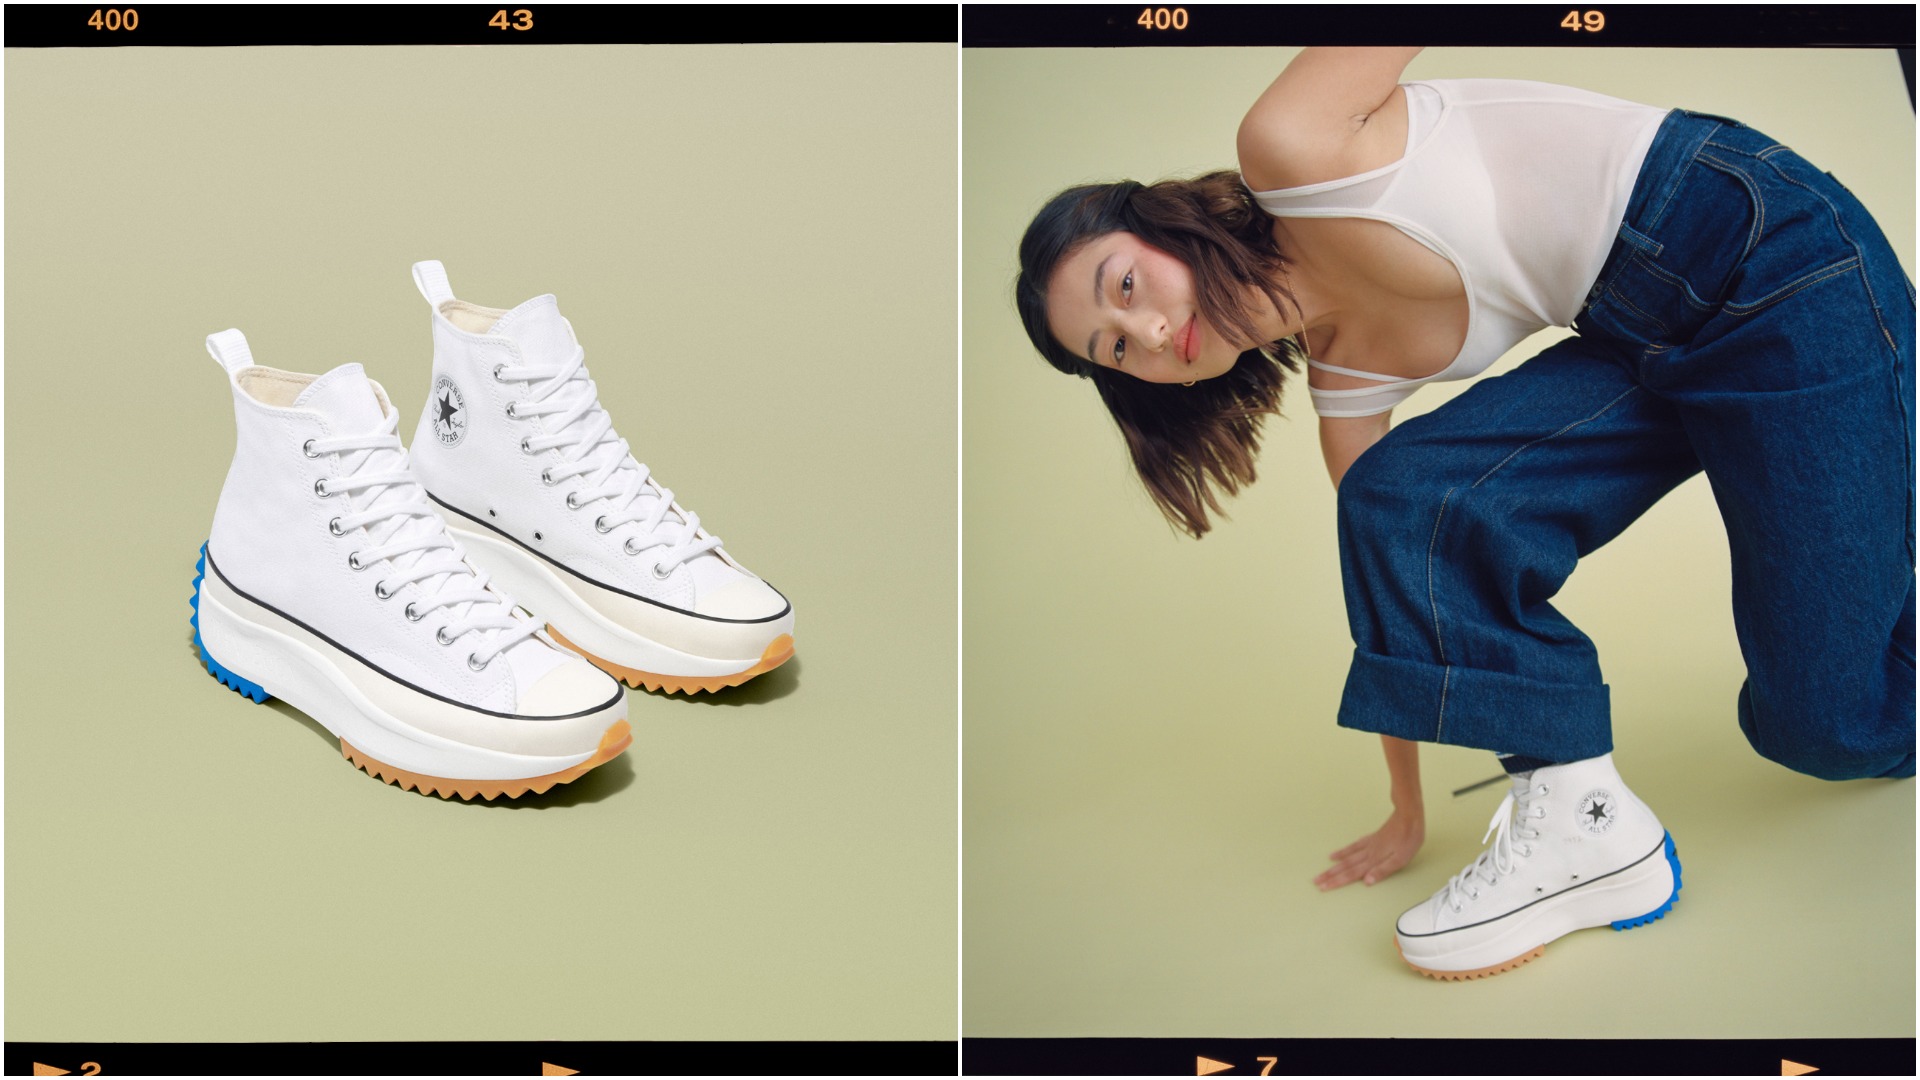 Converse x jw anderson have given us 